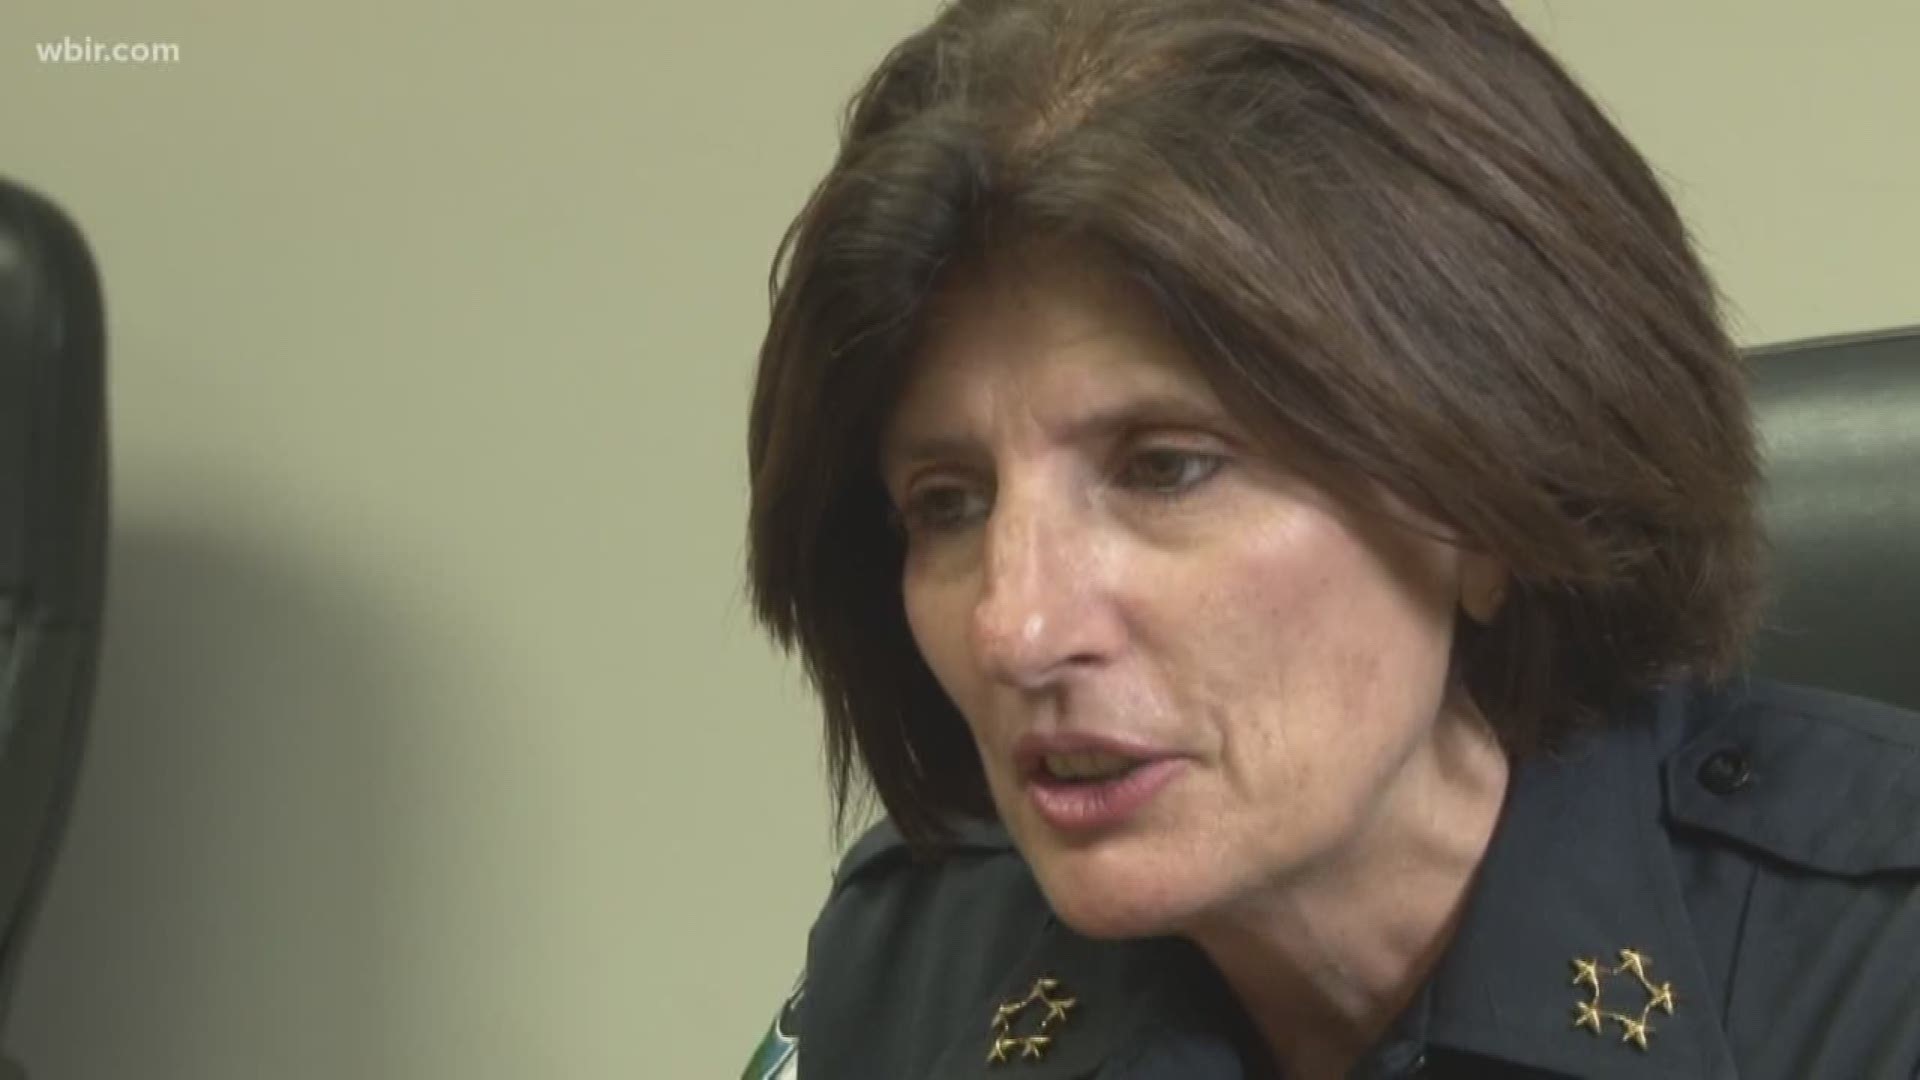 After nearly two months on the job, Knoxville's police chief says it's been an exciting time in her life.